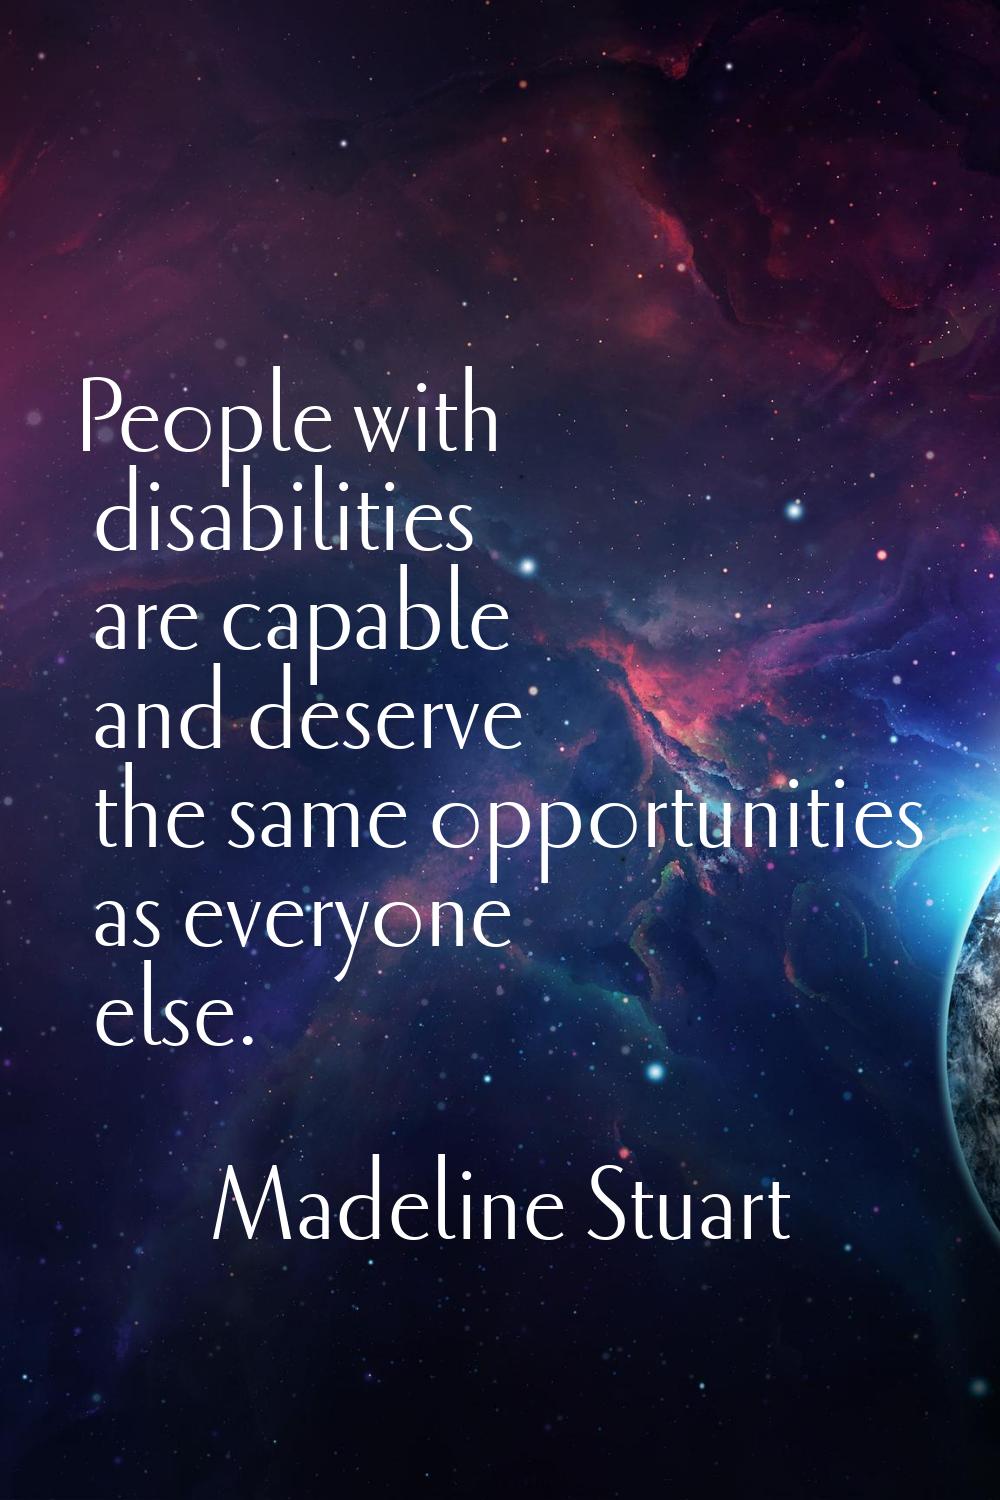 People with disabilities are capable and deserve the same opportunities as everyone else.